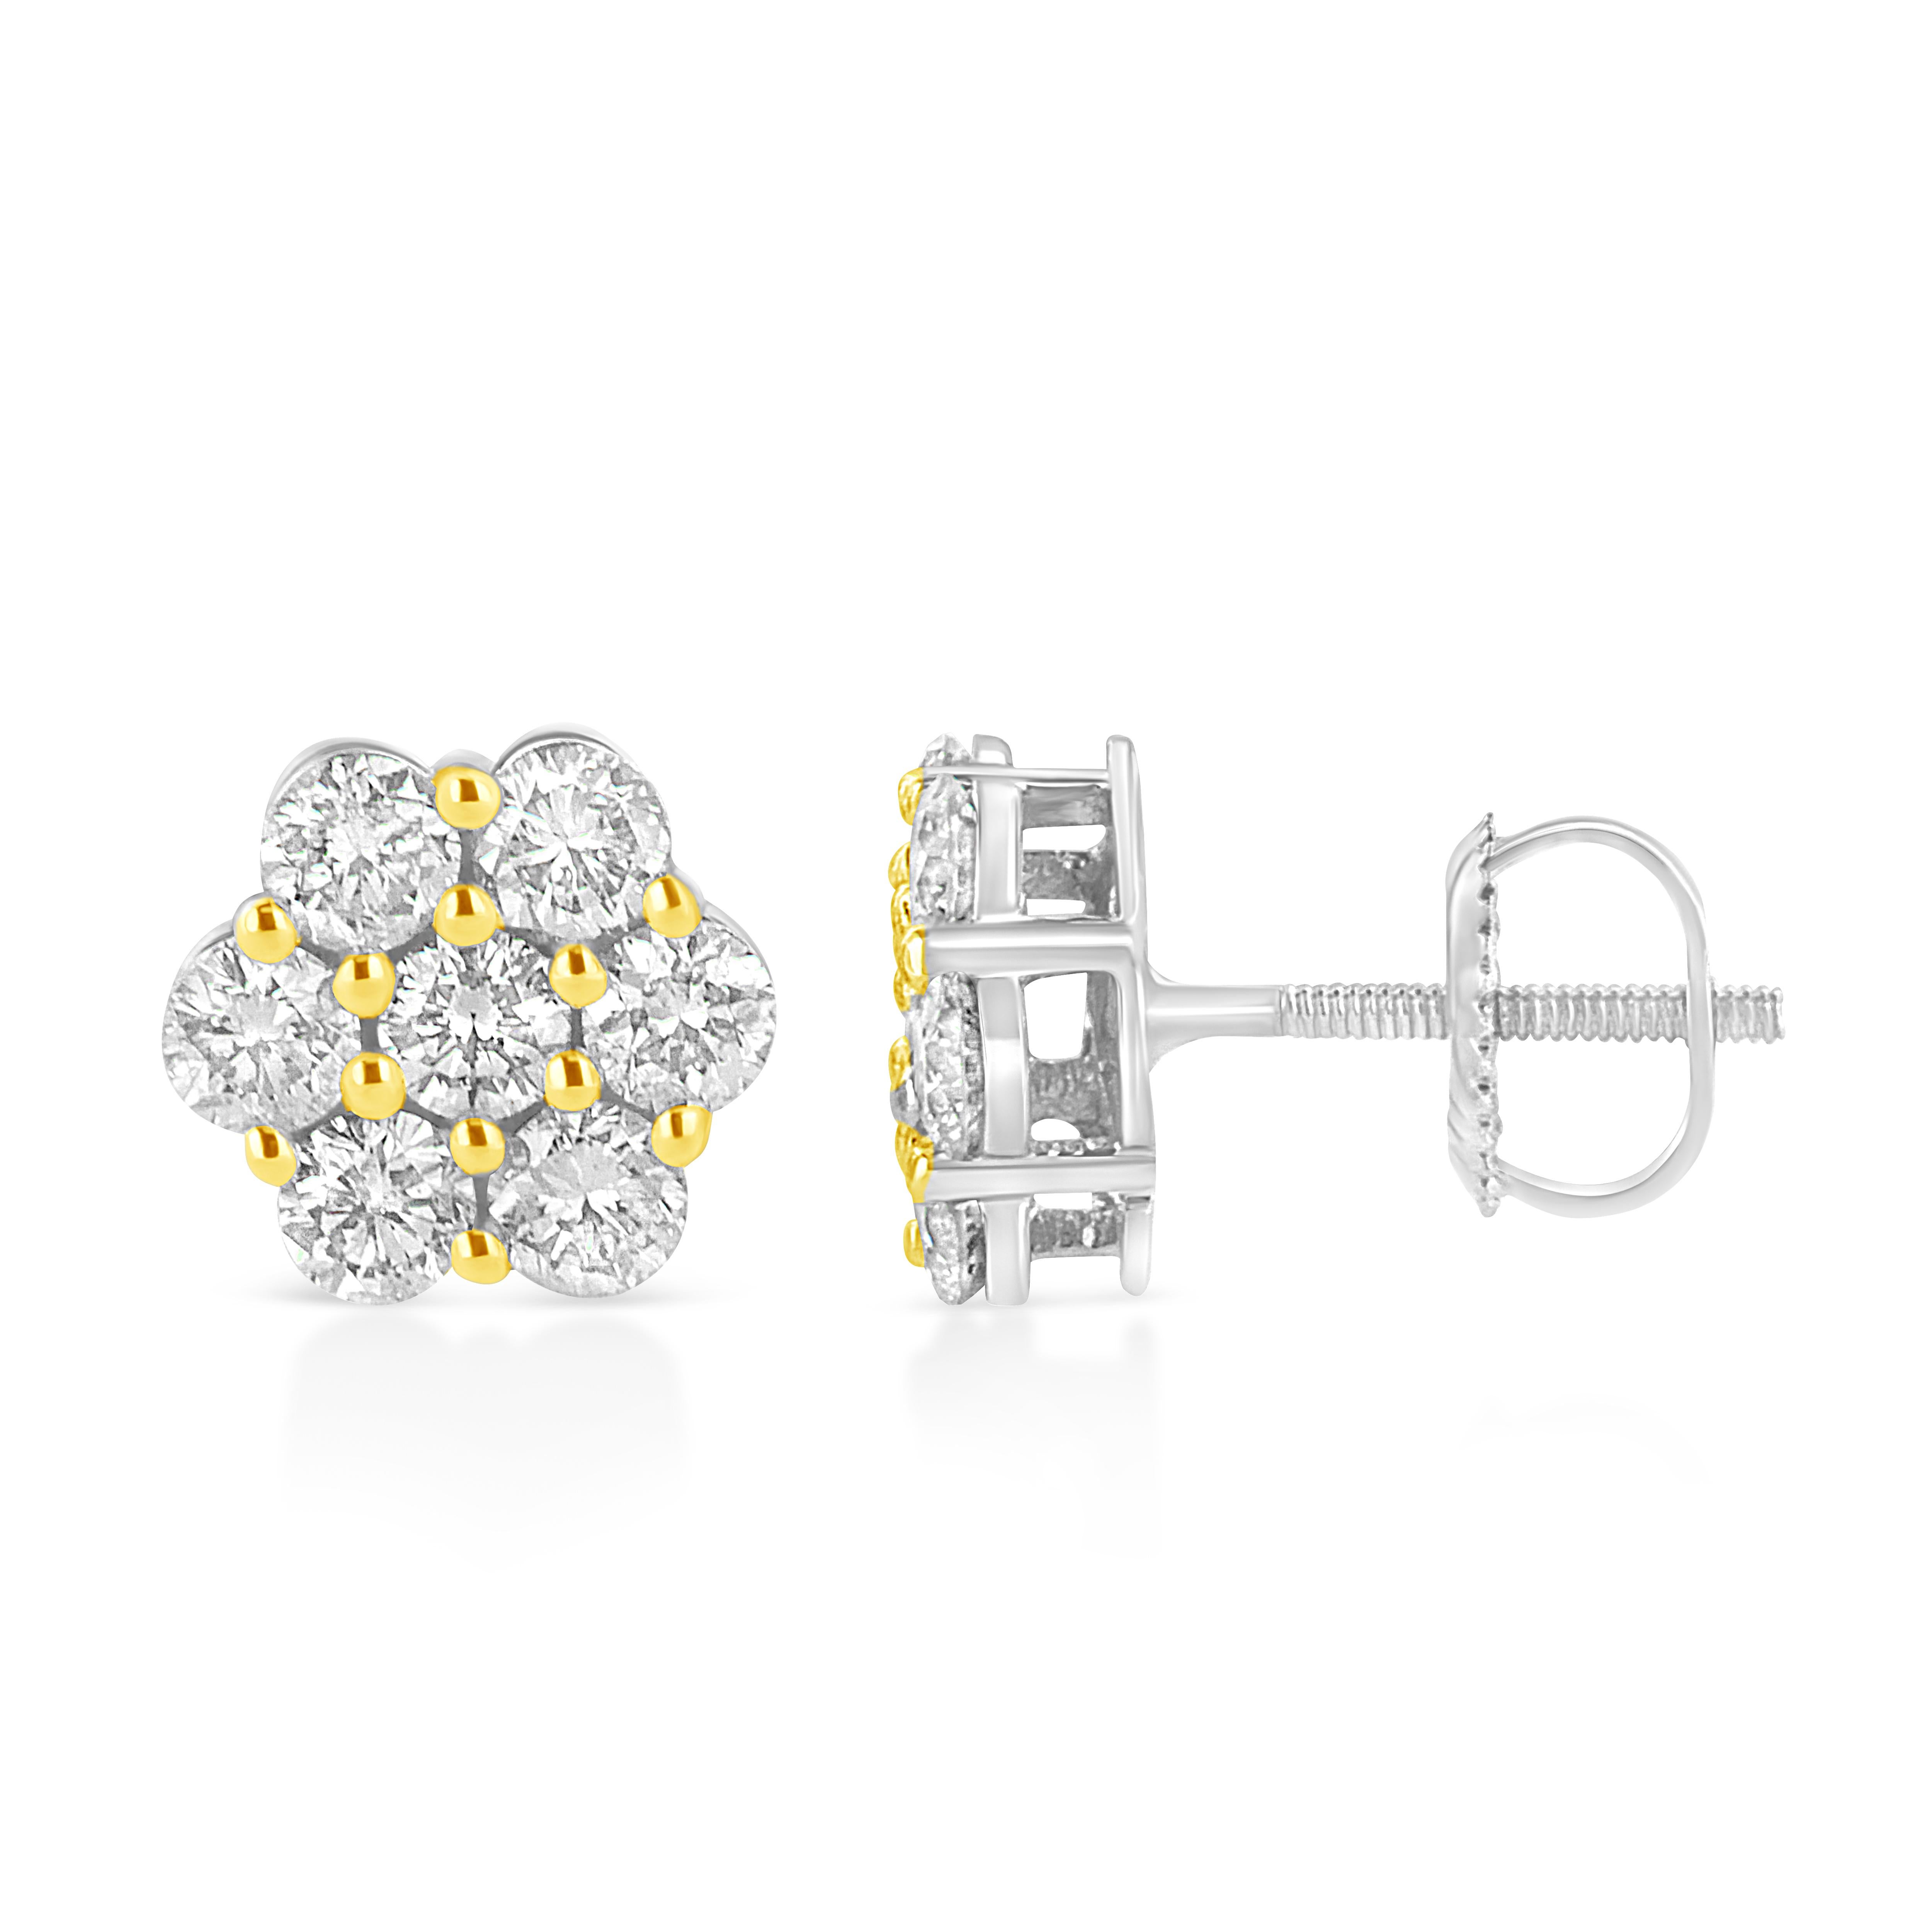 You will fall in love with these classic cluster stud earrings. A must have for any serious jewelry collection, these 14K Yellow Gold plated sterling silver earrings boast an impressive 1/4 carat total weight of diamonds with seven stones each. The